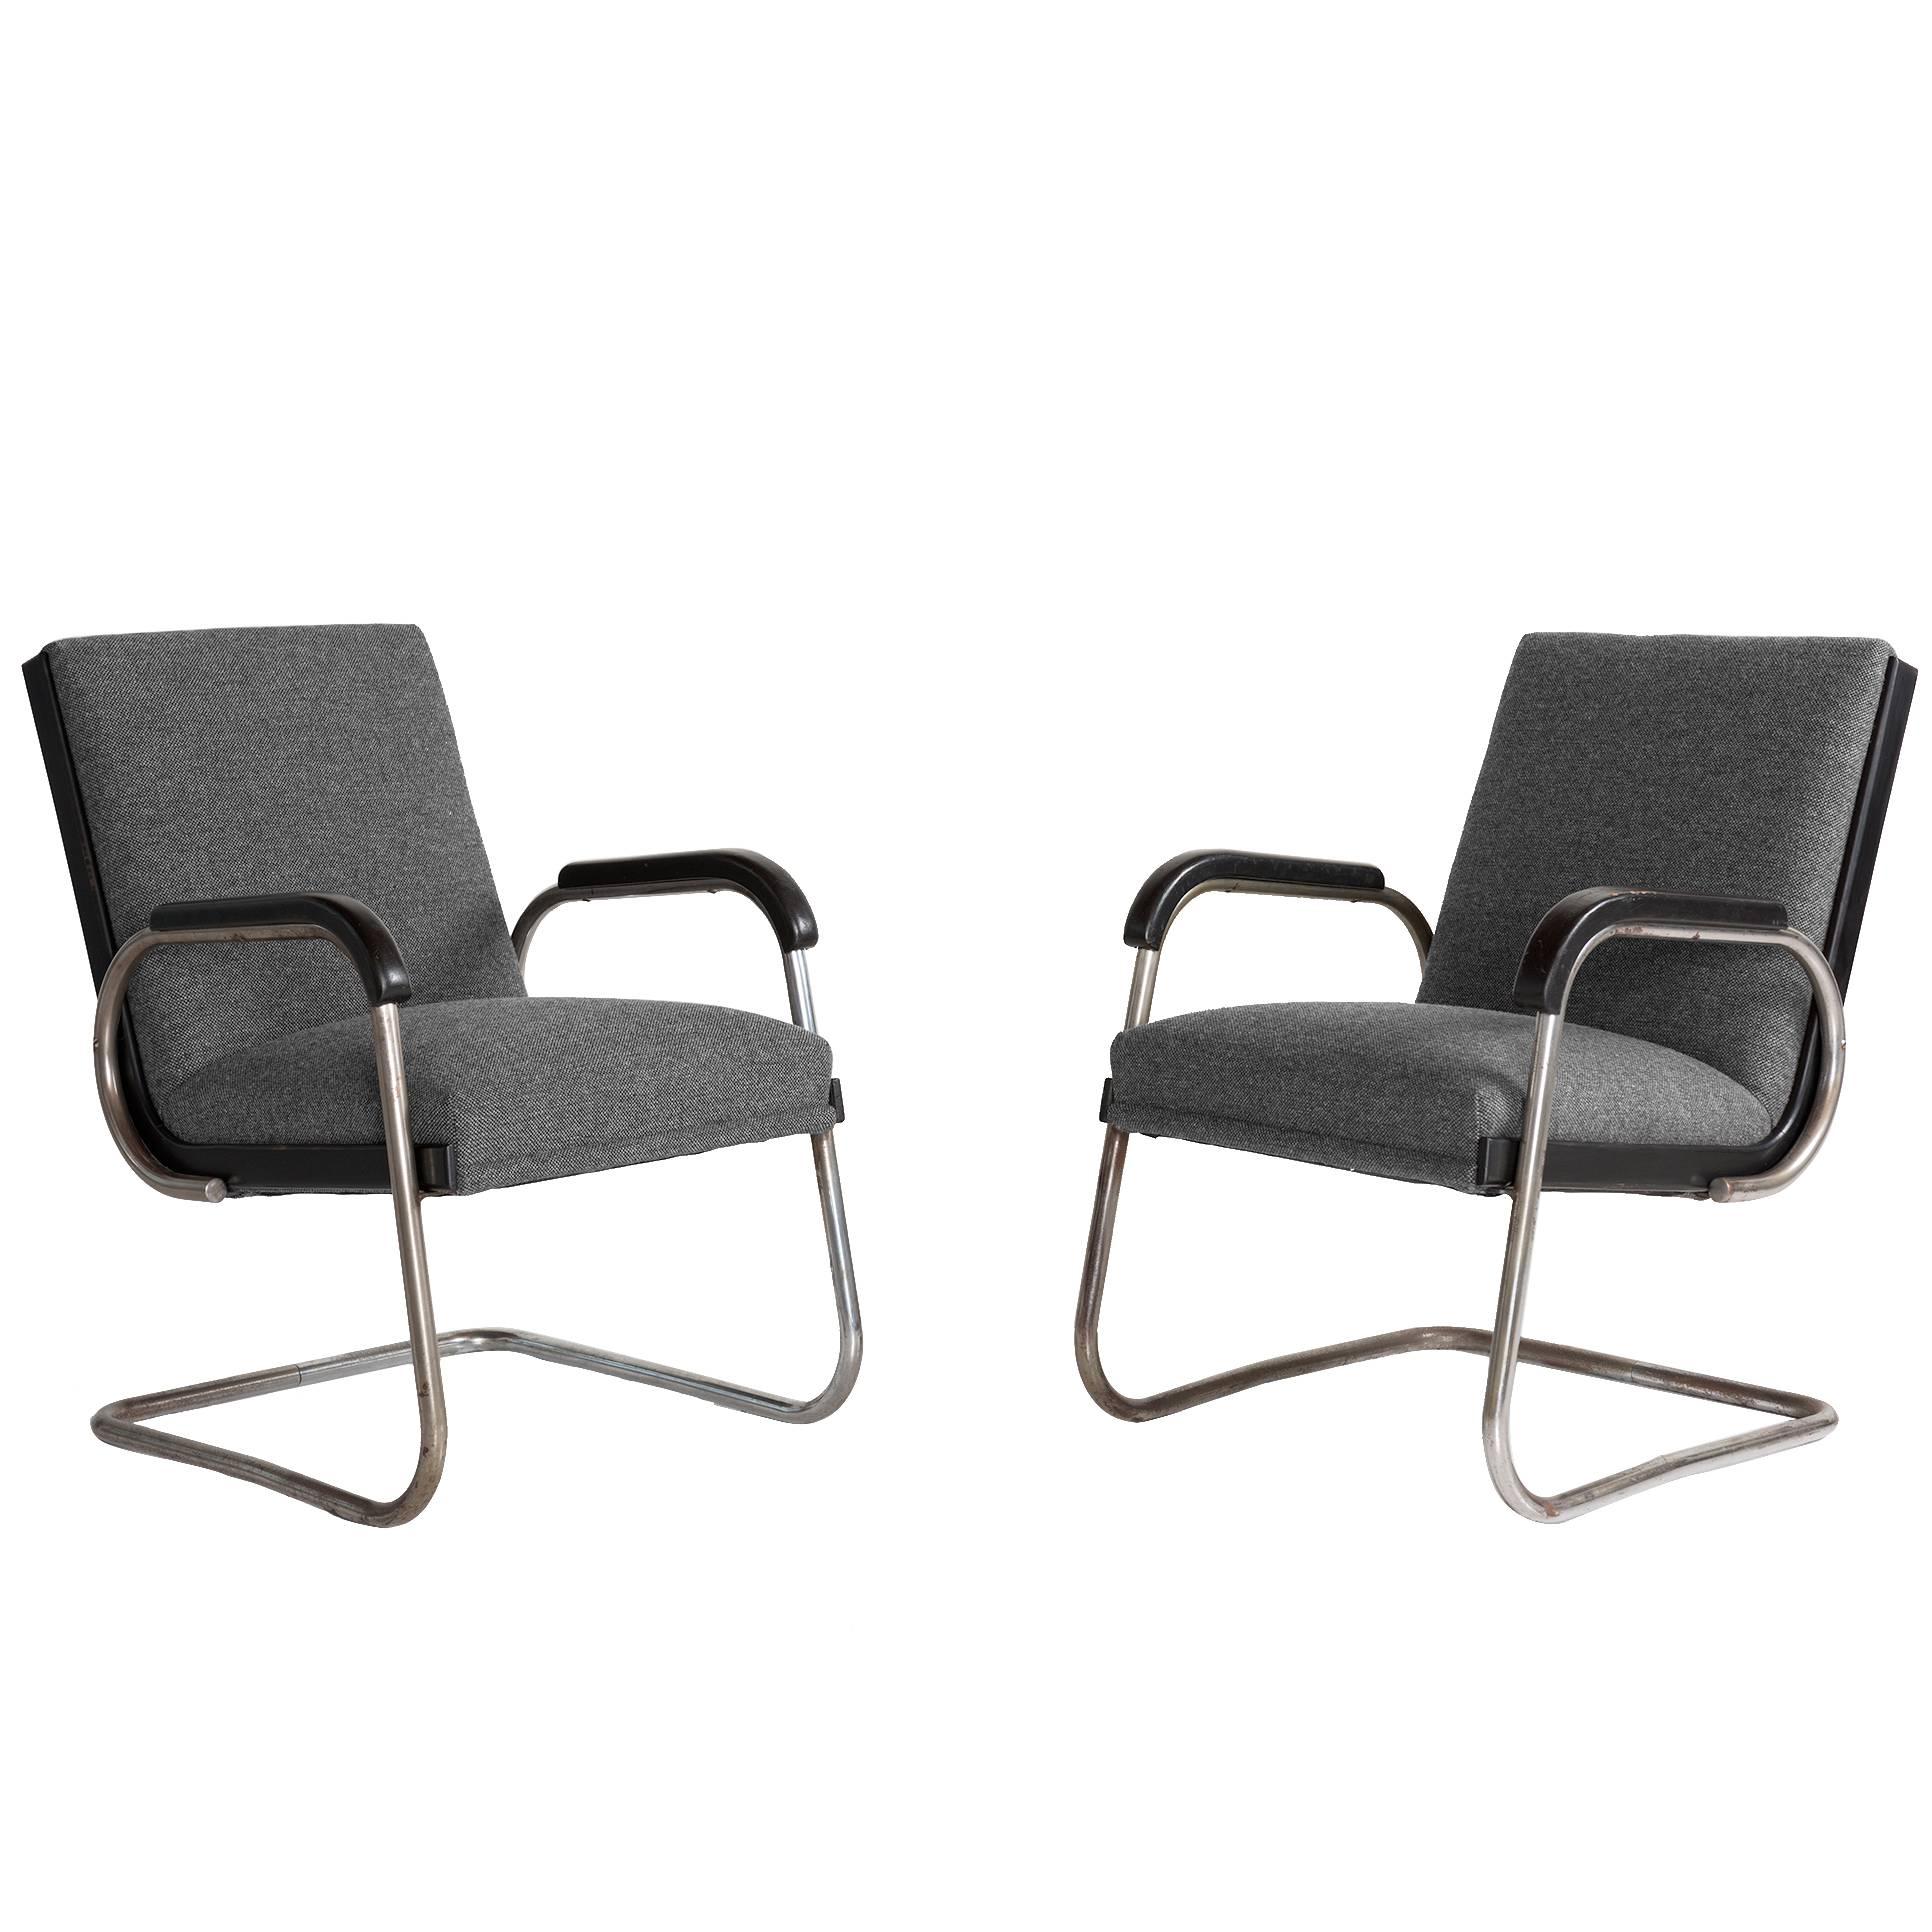 Pair of Cantilever Armchairs by Thonet, circa 1930